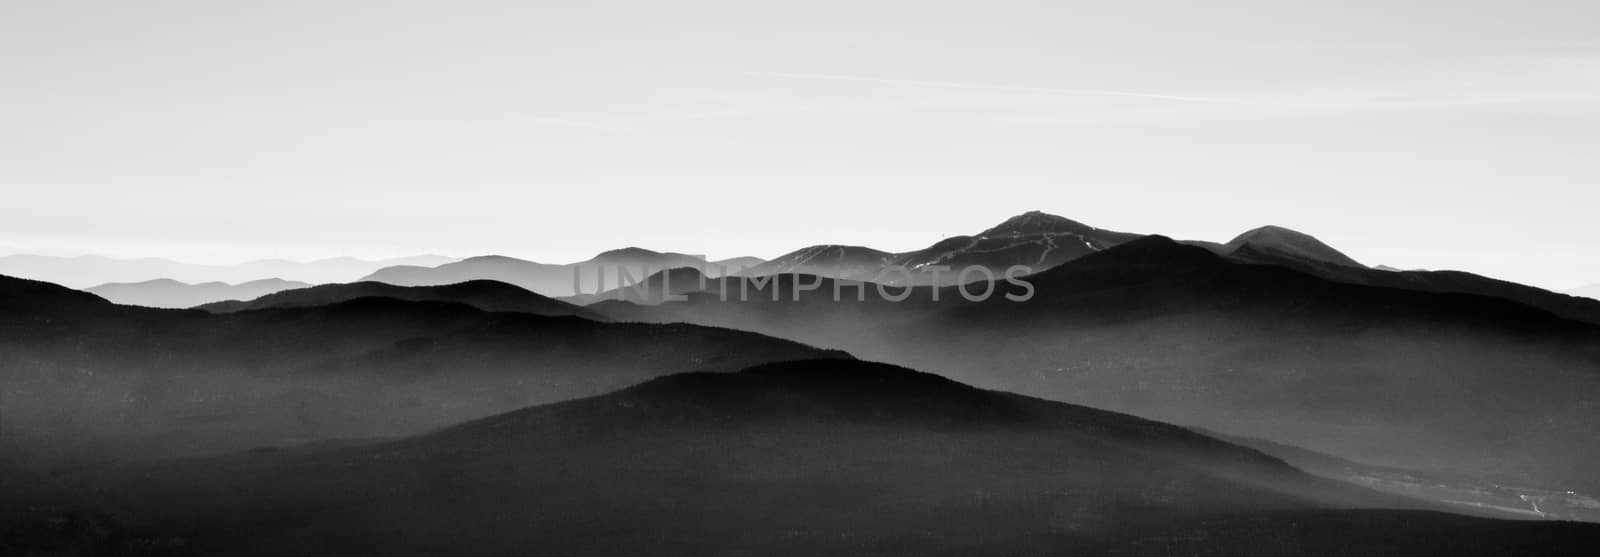 Black and white mountains landscape by fpalaticky